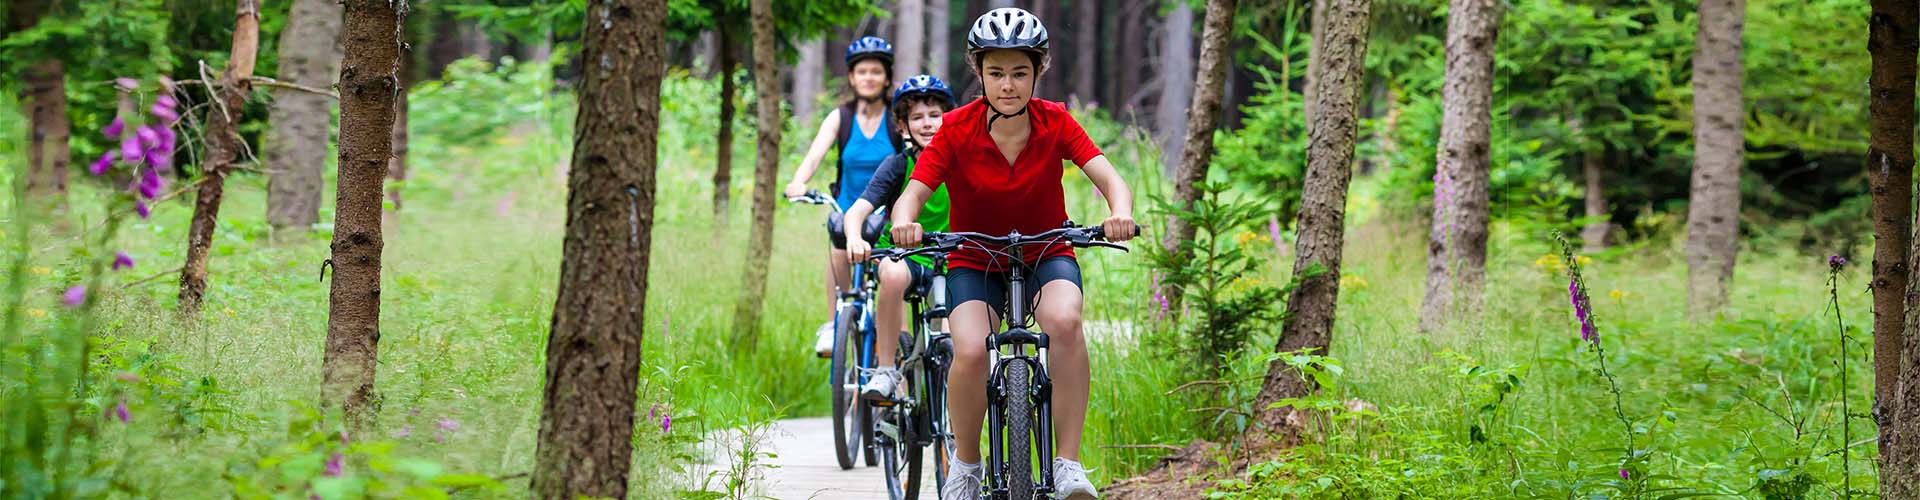 Happy active family riding bikes in nature forest